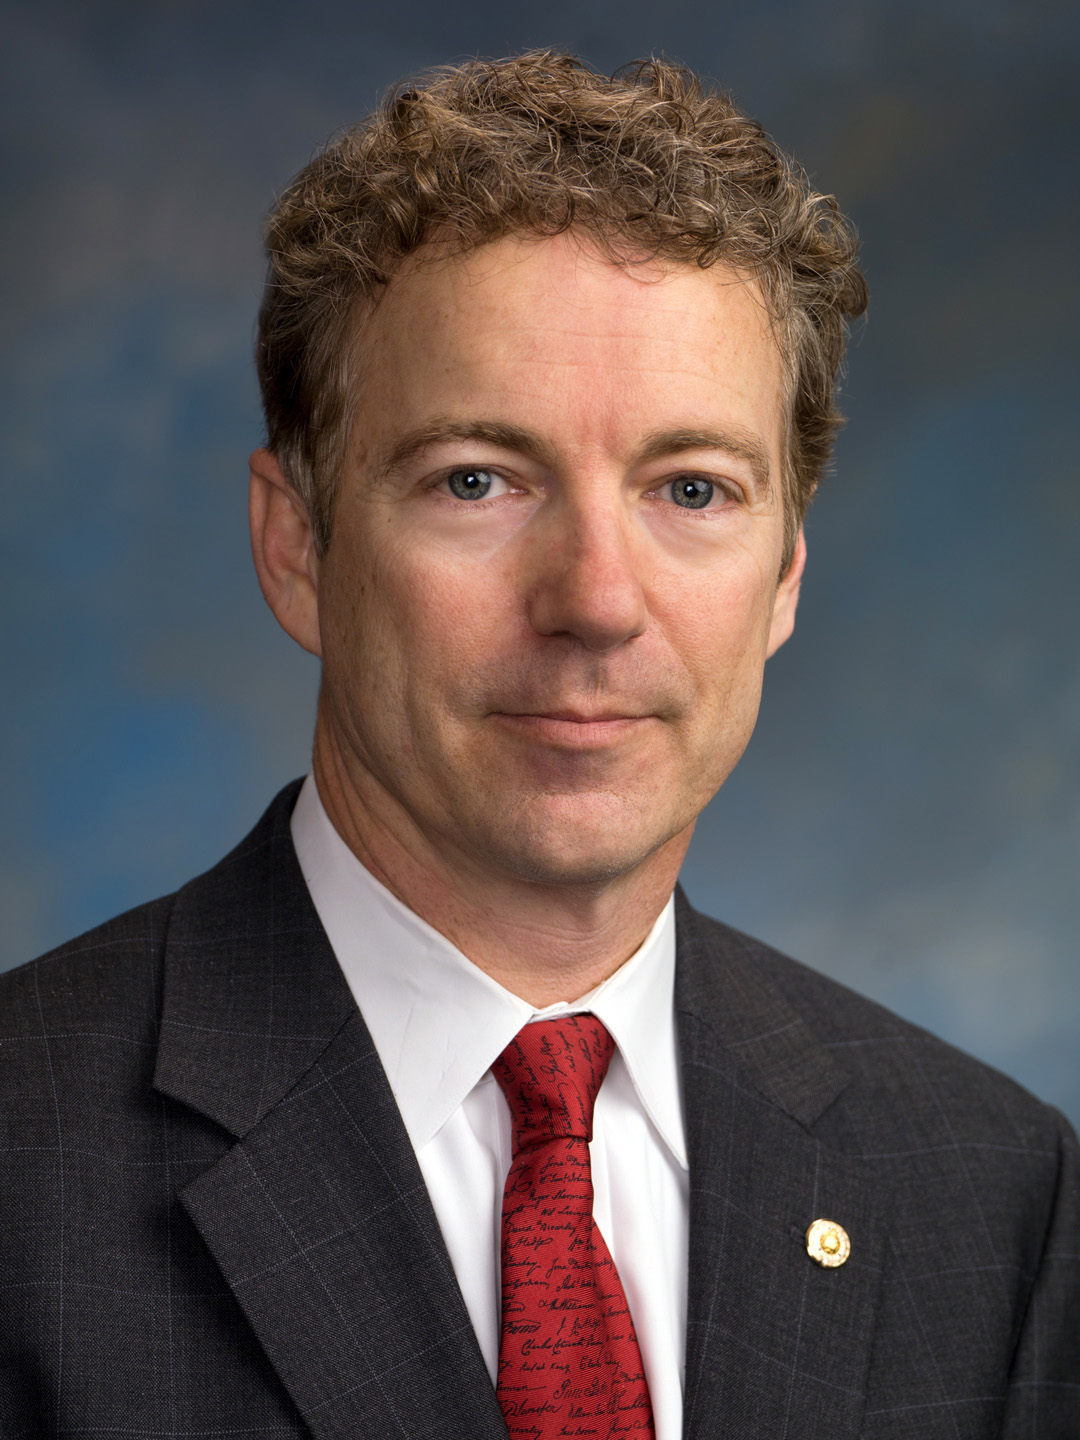 Rand Paul introduces police reform bills, Ice Cube cheap shot - Tampa ...